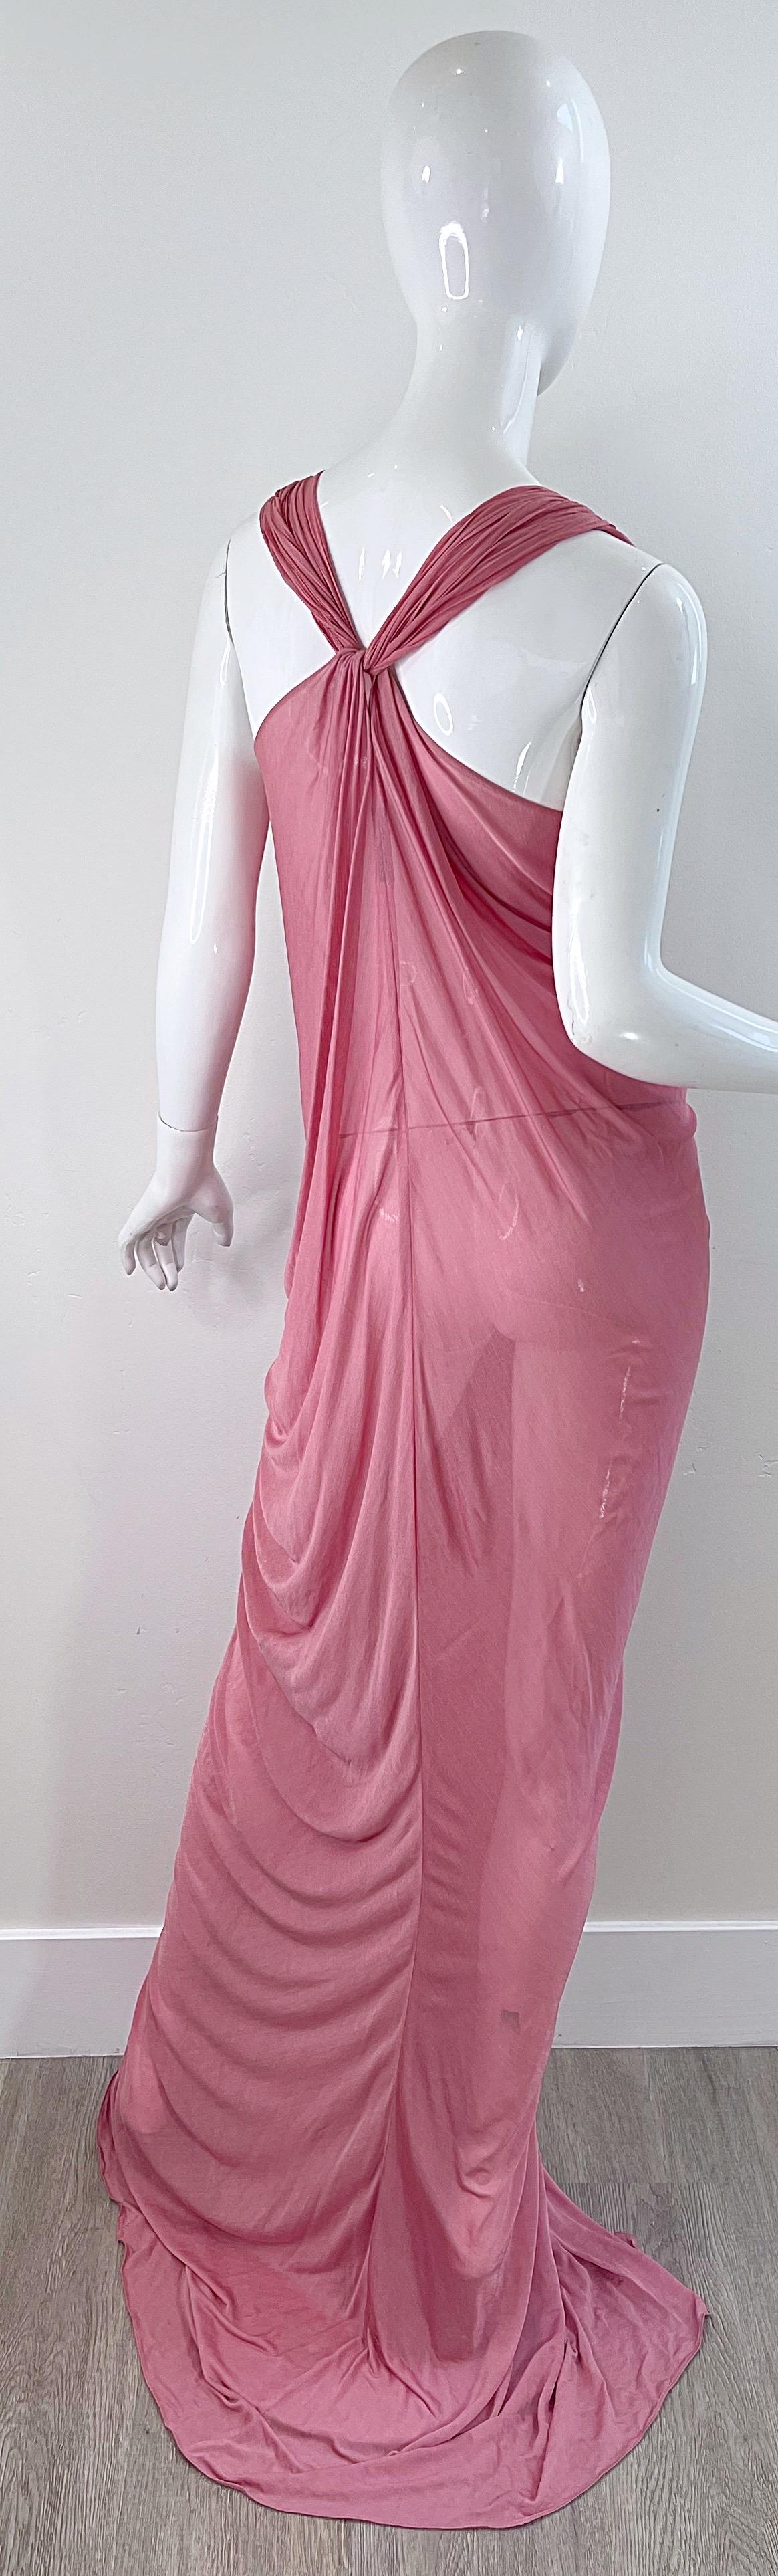 Women's NWT Donna Karan Fall 2005 Pink Dusty Rose Mauve 30s Style Semi Sheer Gown Dress For Sale